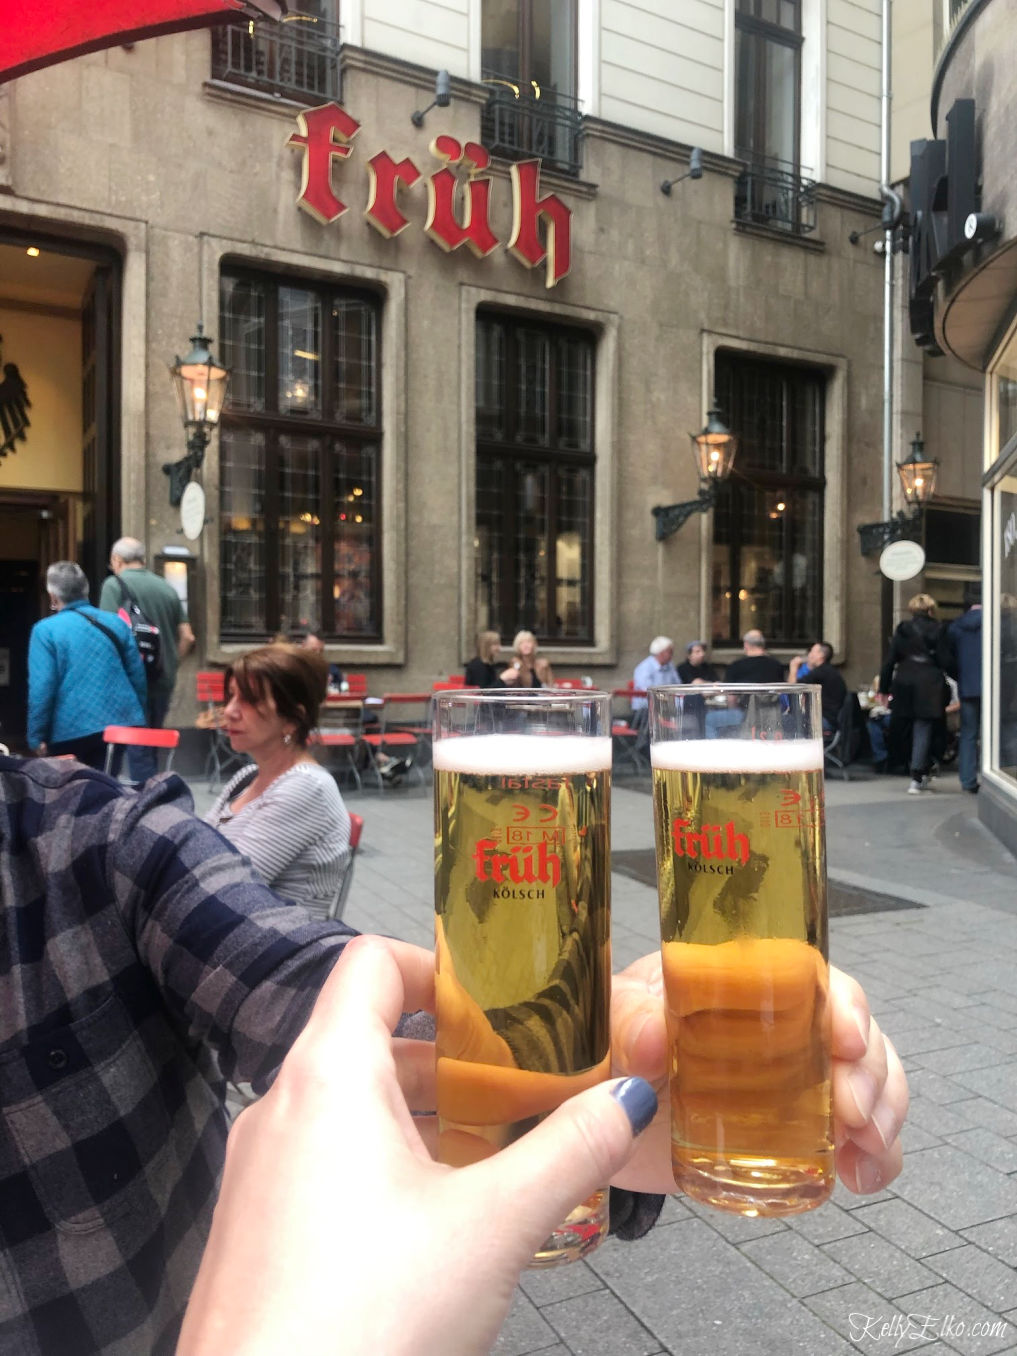 Drink Kolsch beer at a real Brauhaus while in Cologne Germany kellyelko.com #kolsch #colognegermany #brauhaus #germany #travel #beer #travelblogger #rhineriver #rivercruise 